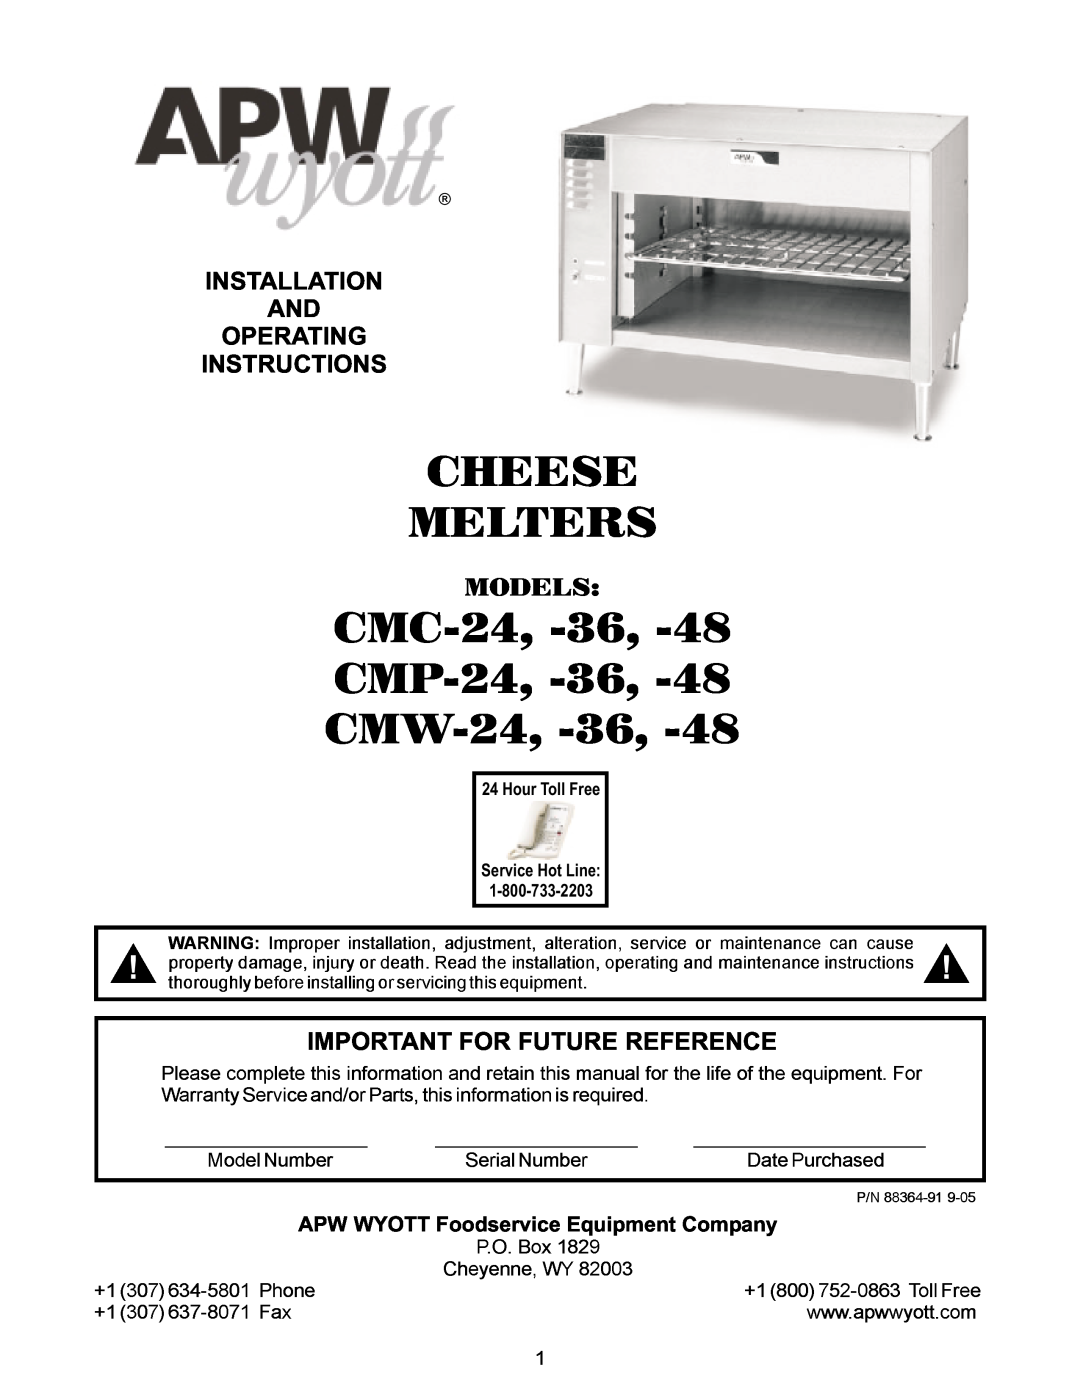 APW Wyott CMC-48 manual Installation And Operating Instructions, Important For Future Reference, Cheese Melters, Models 